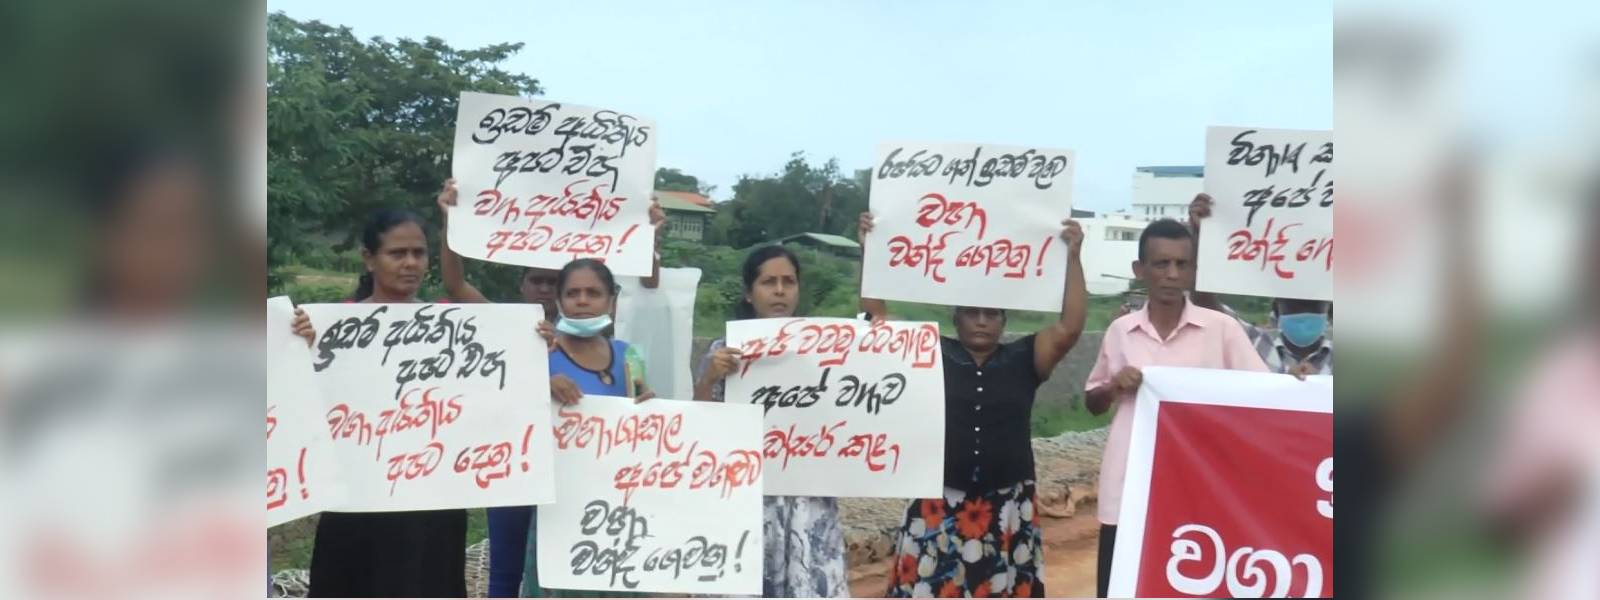 Protest against land filling project